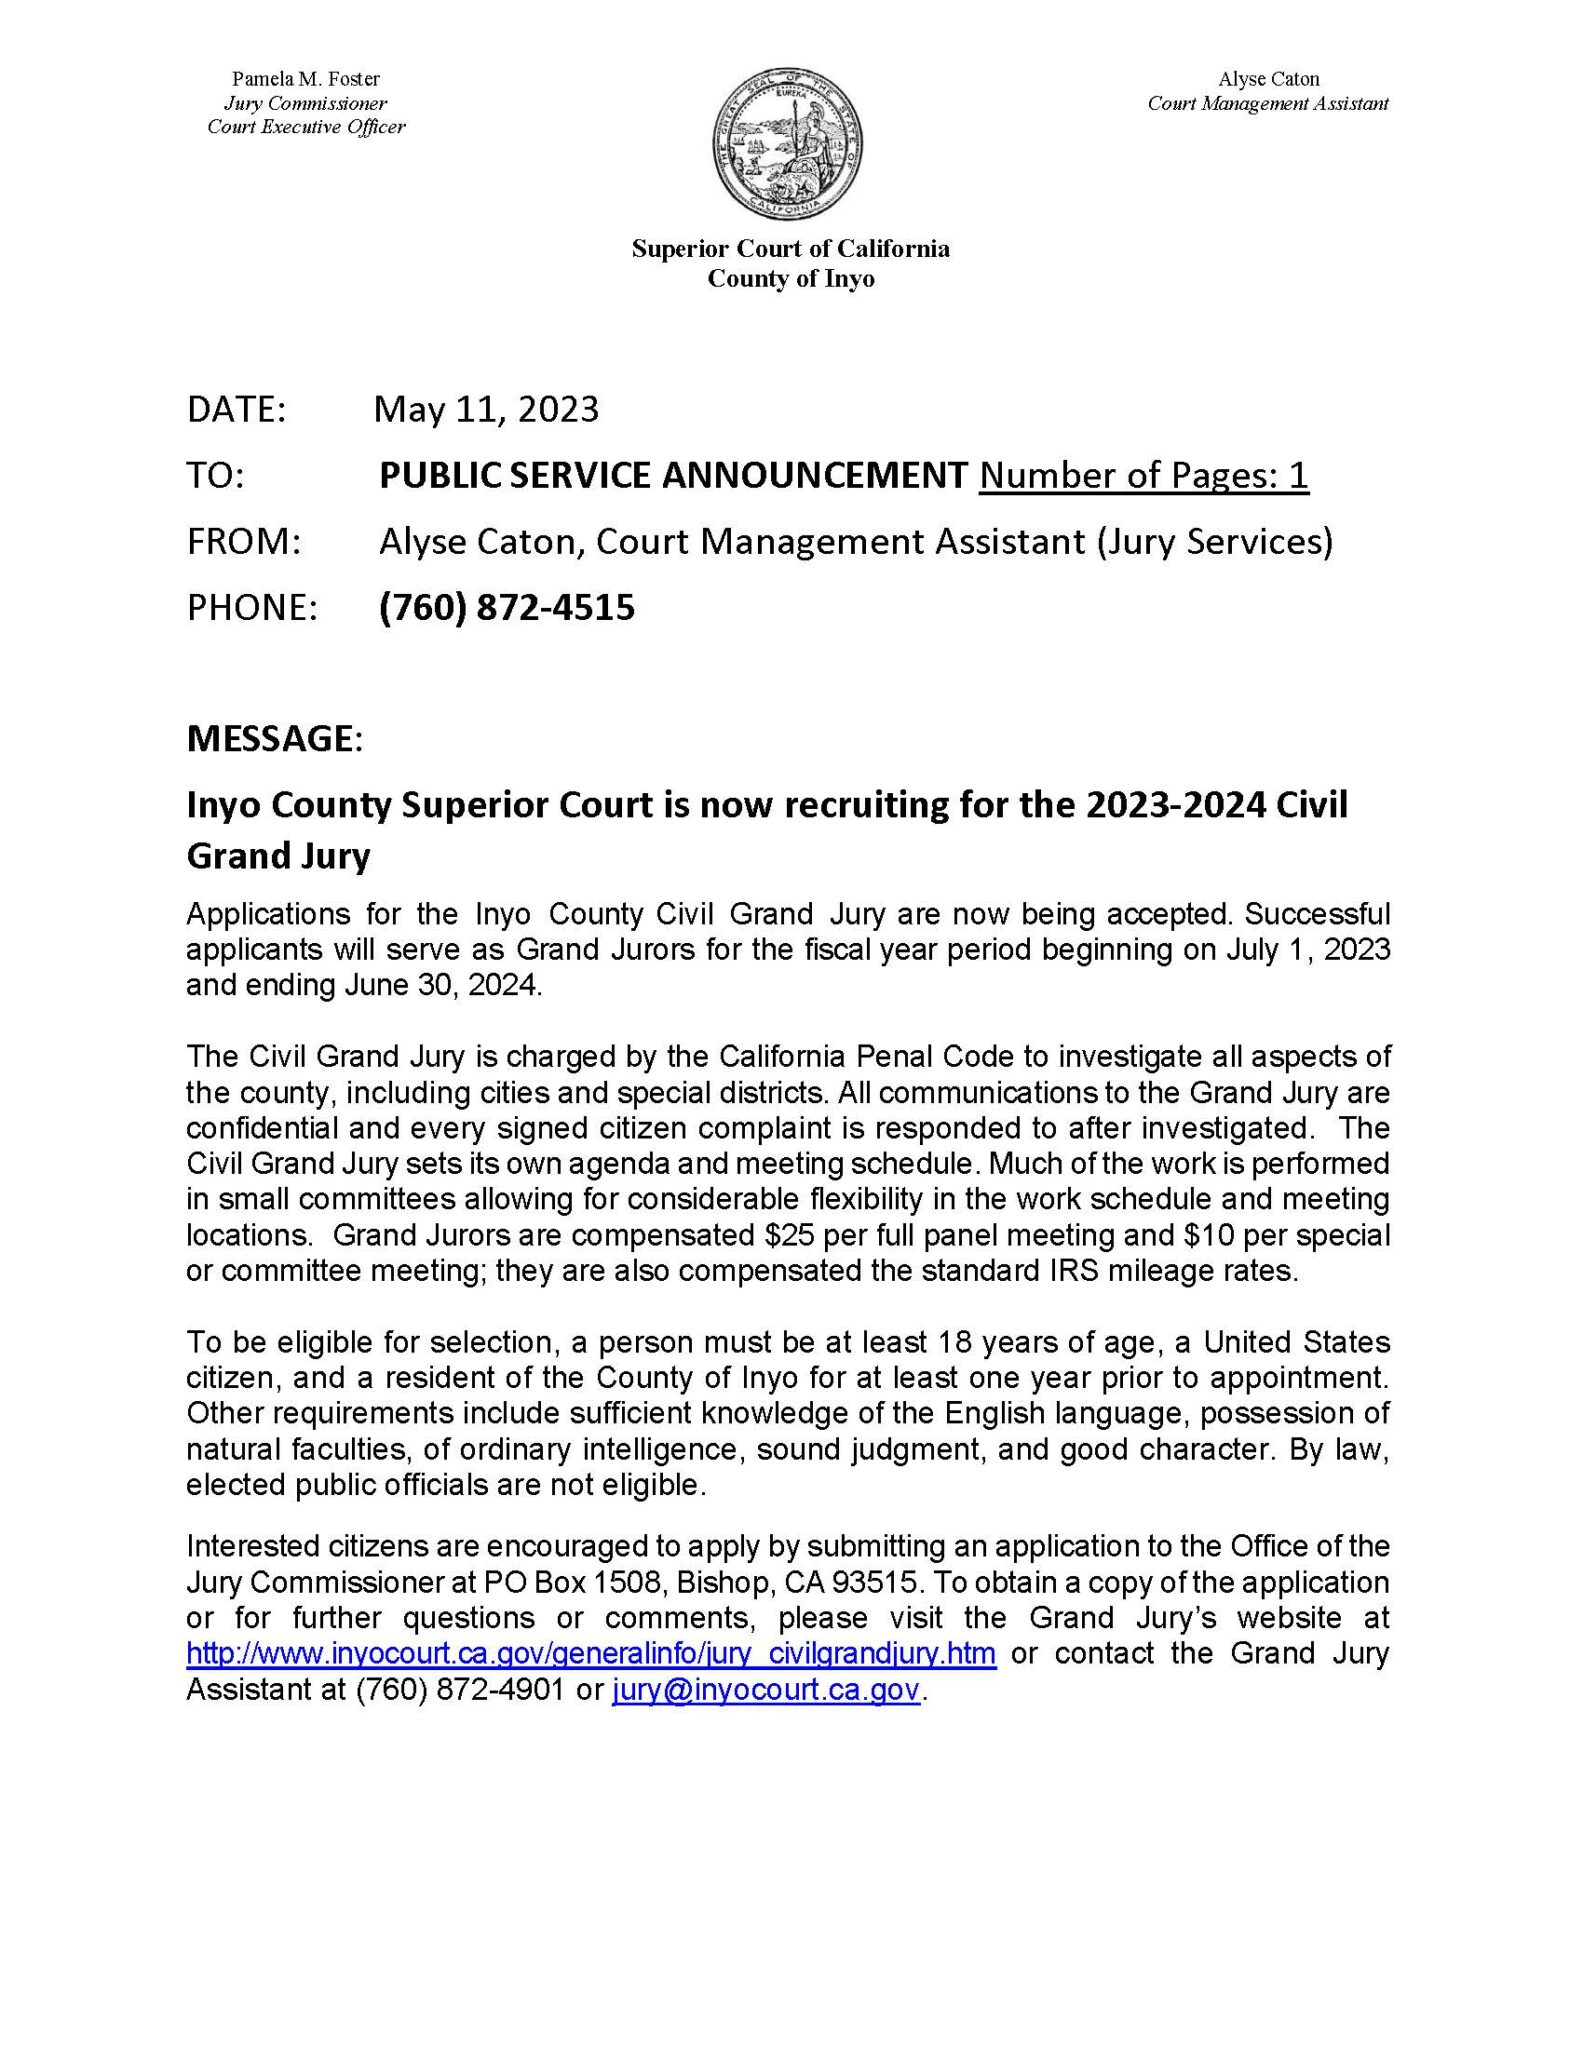 Inyo County Superior Court is Now Recruiting for the 2023 2024 Civil